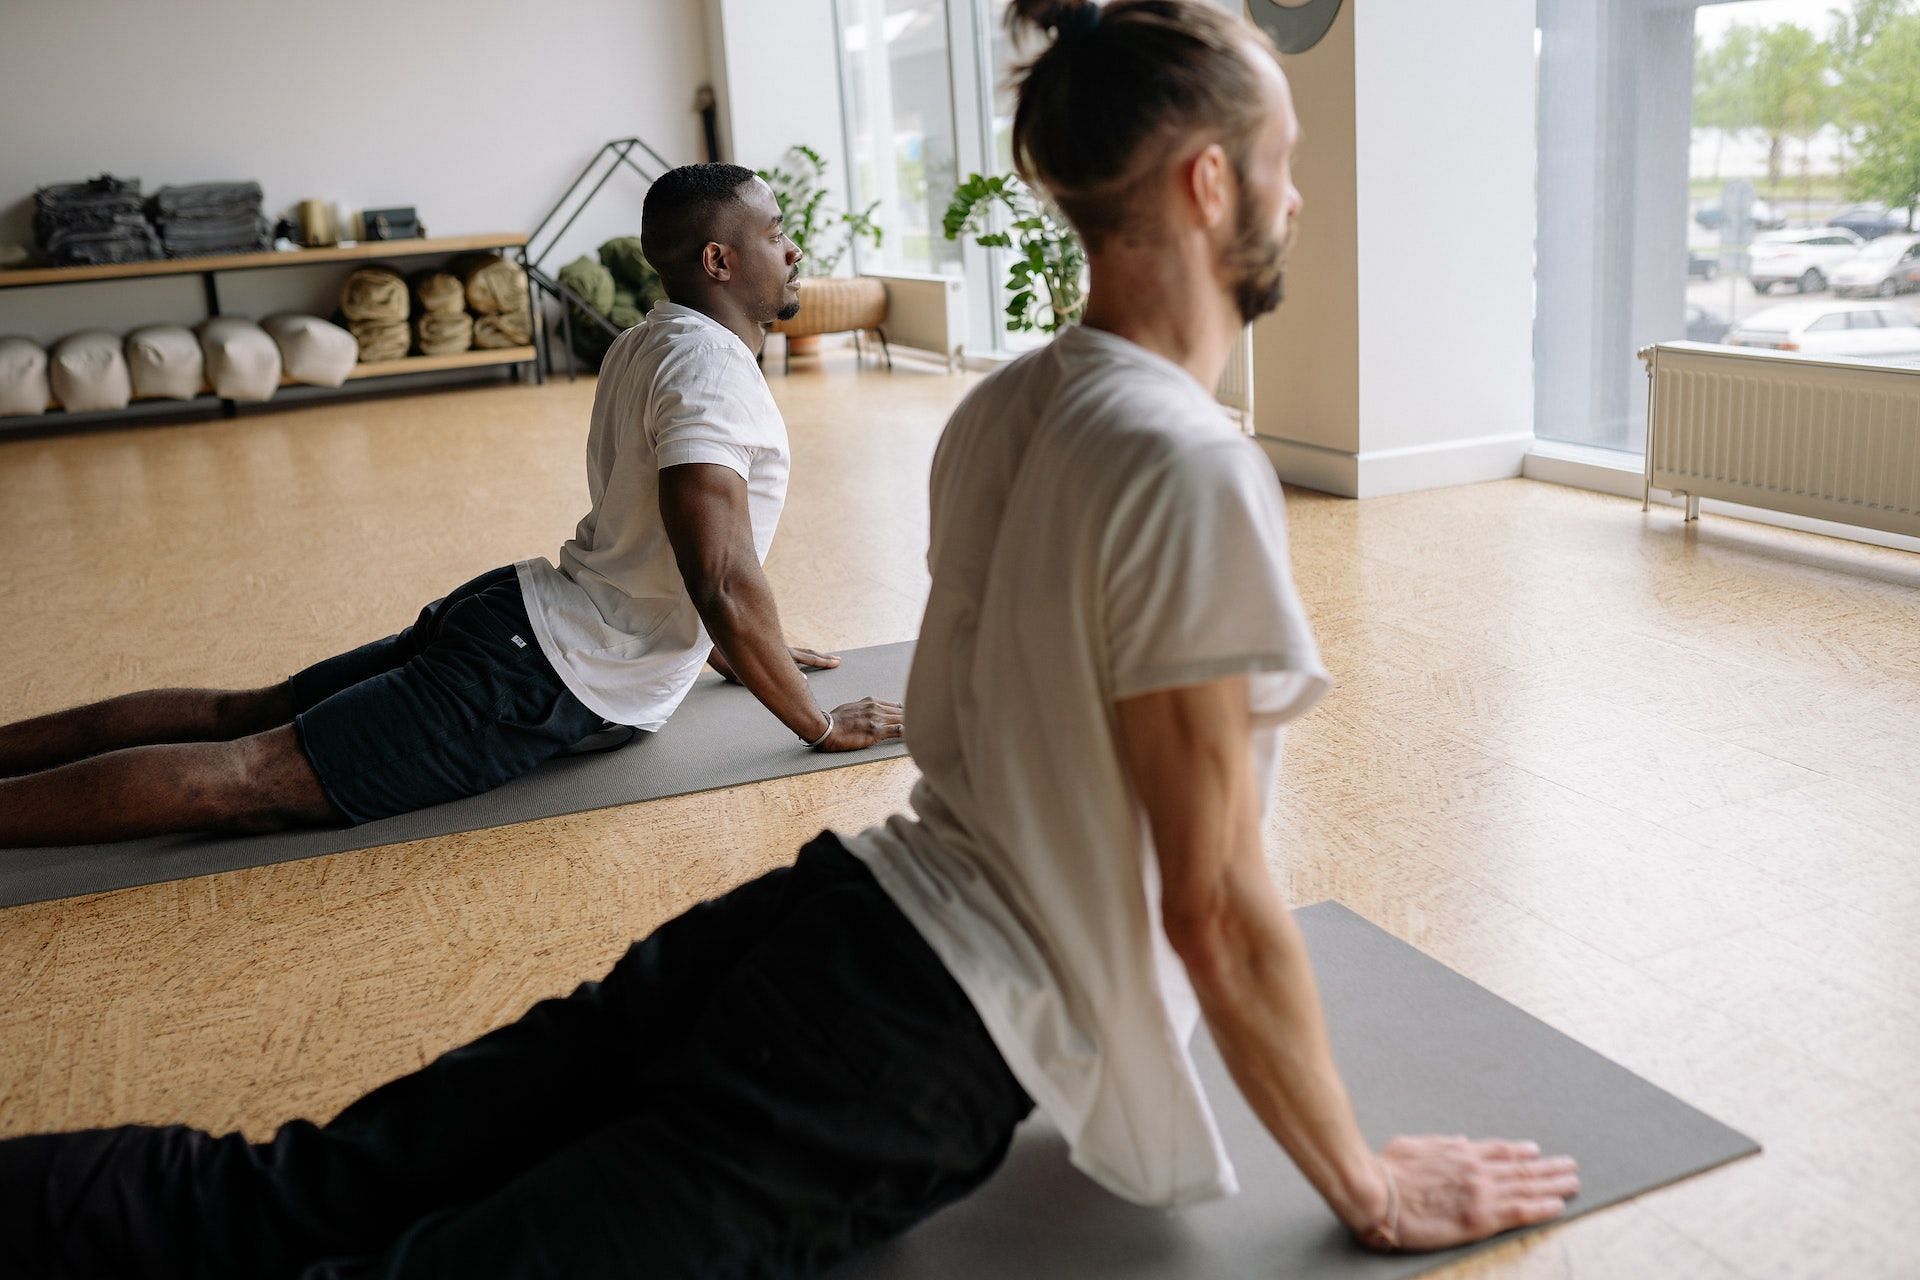 Inversion therapy for back pain: How it works, risks, and benefits